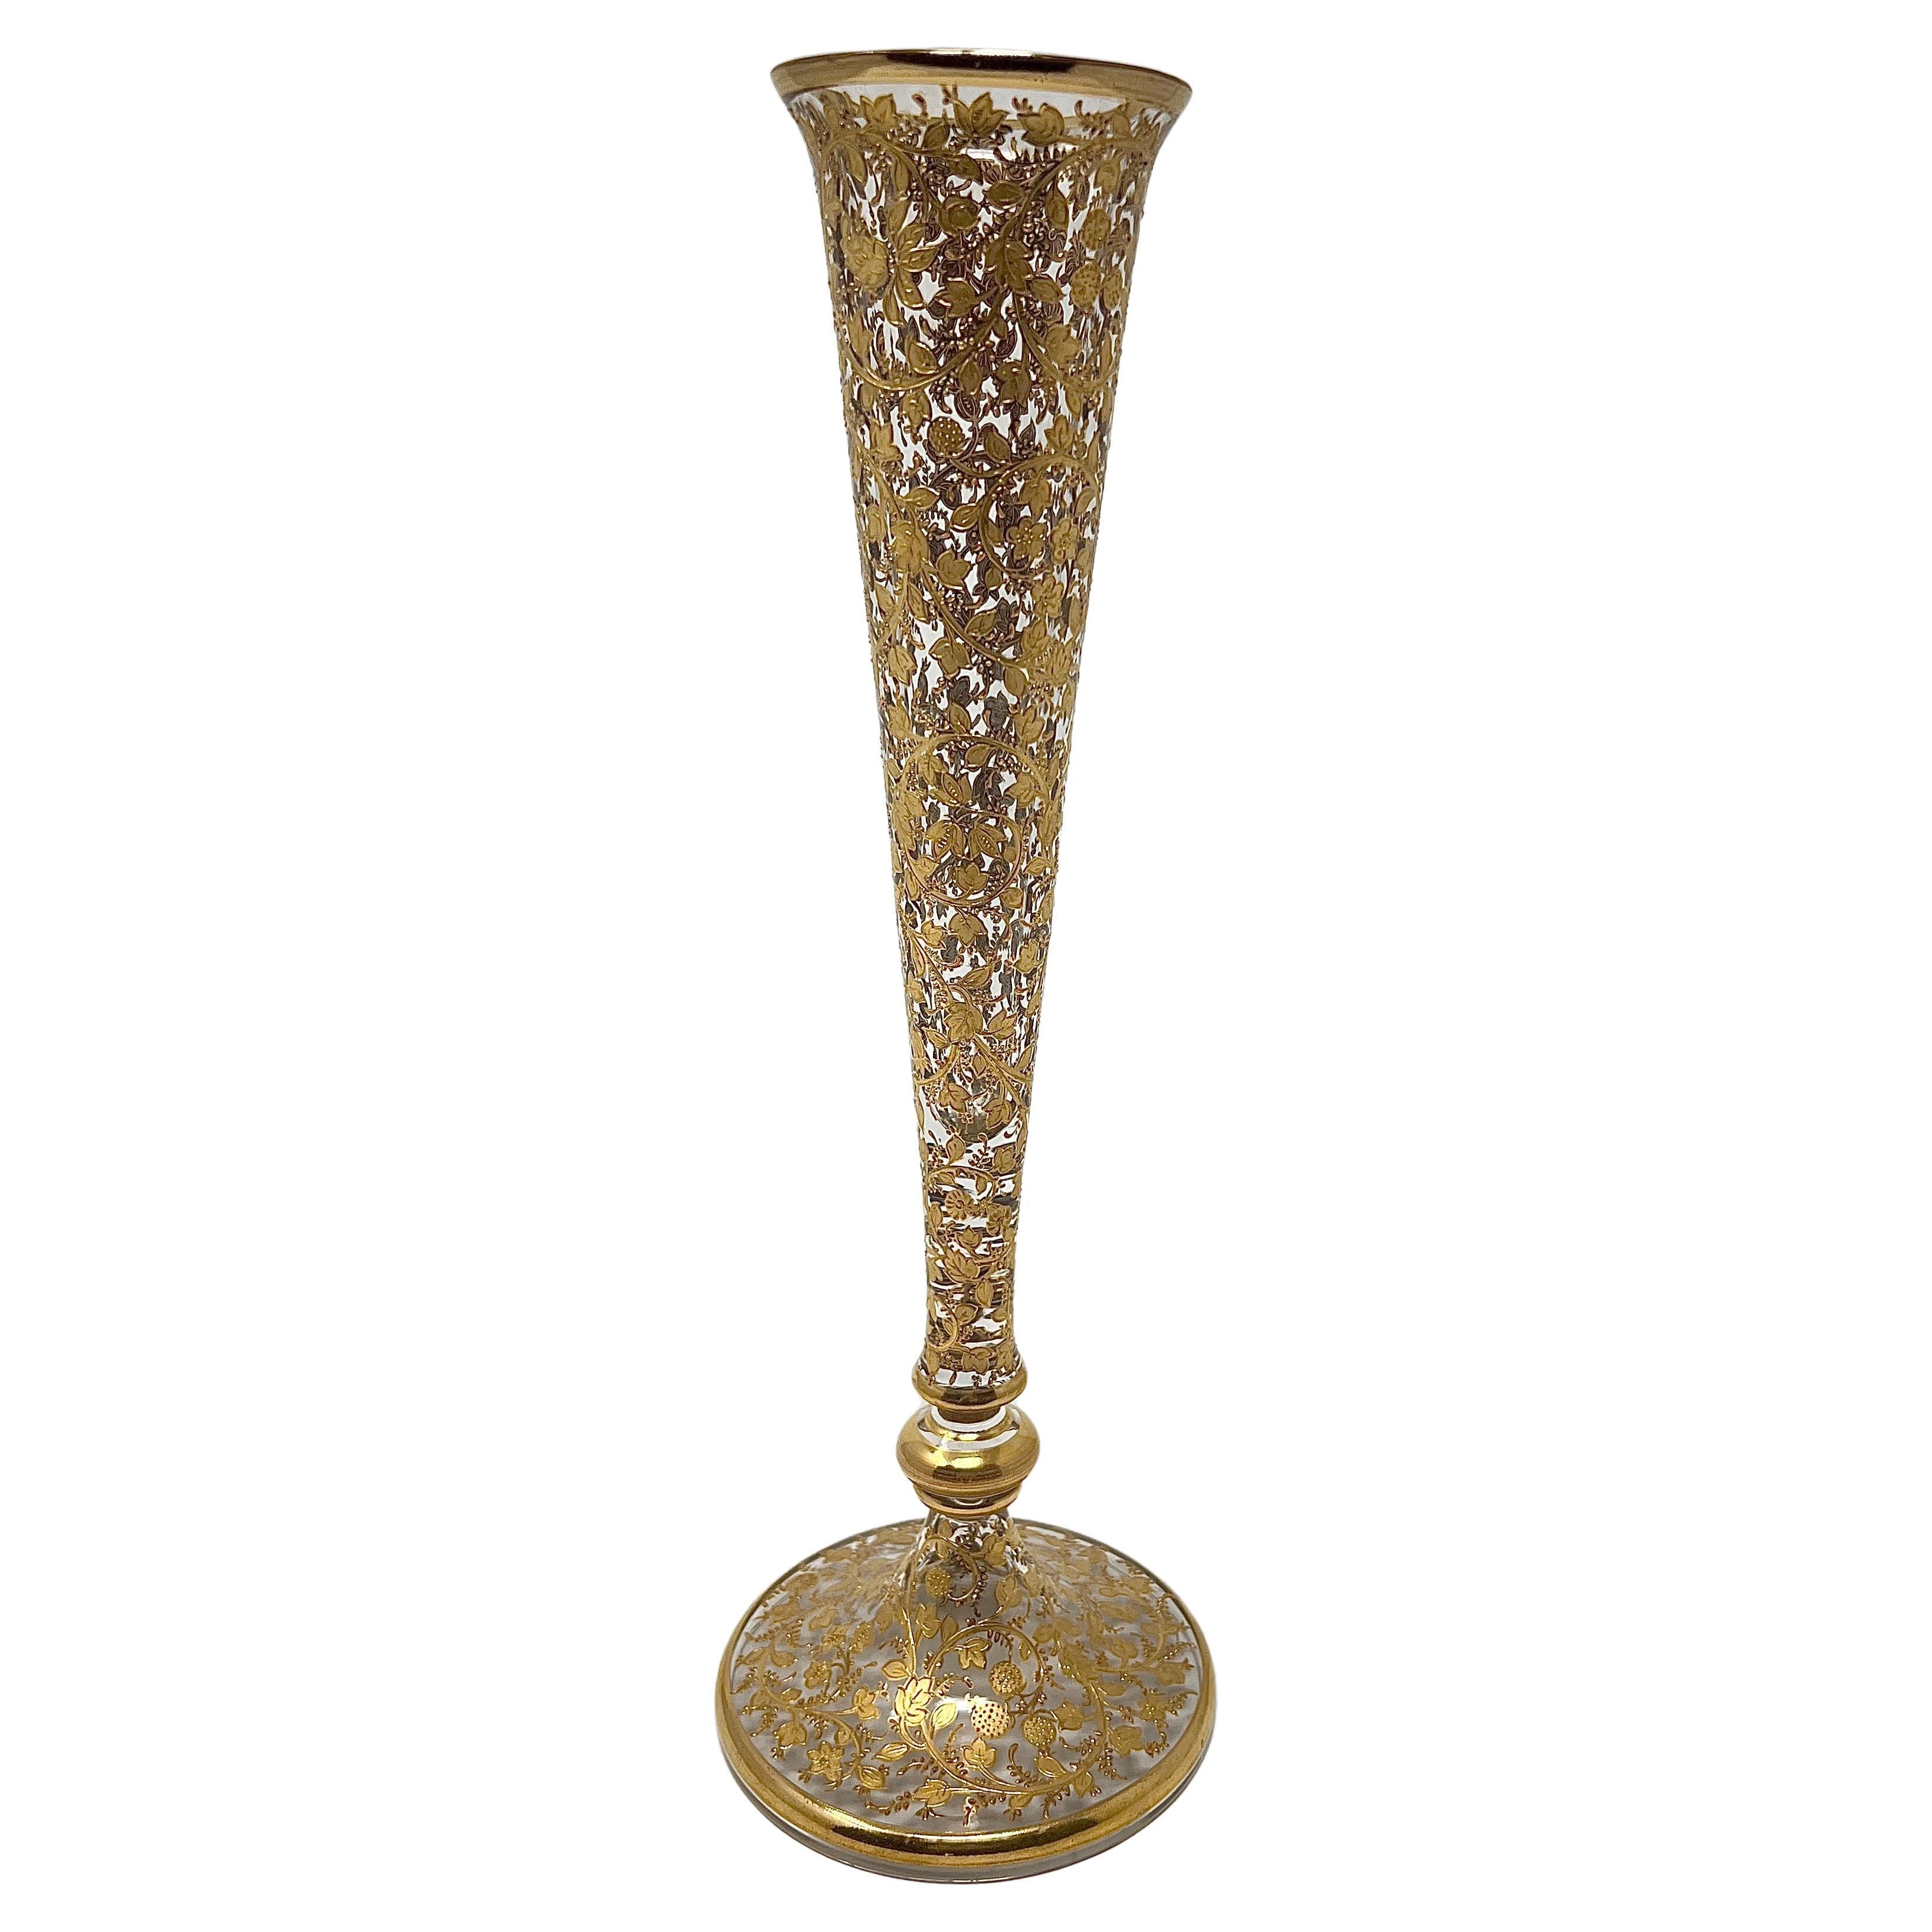 Antique 19th Century German Moser Glass Bud Vase with Gold Overlay, Circa 1885. For Sale